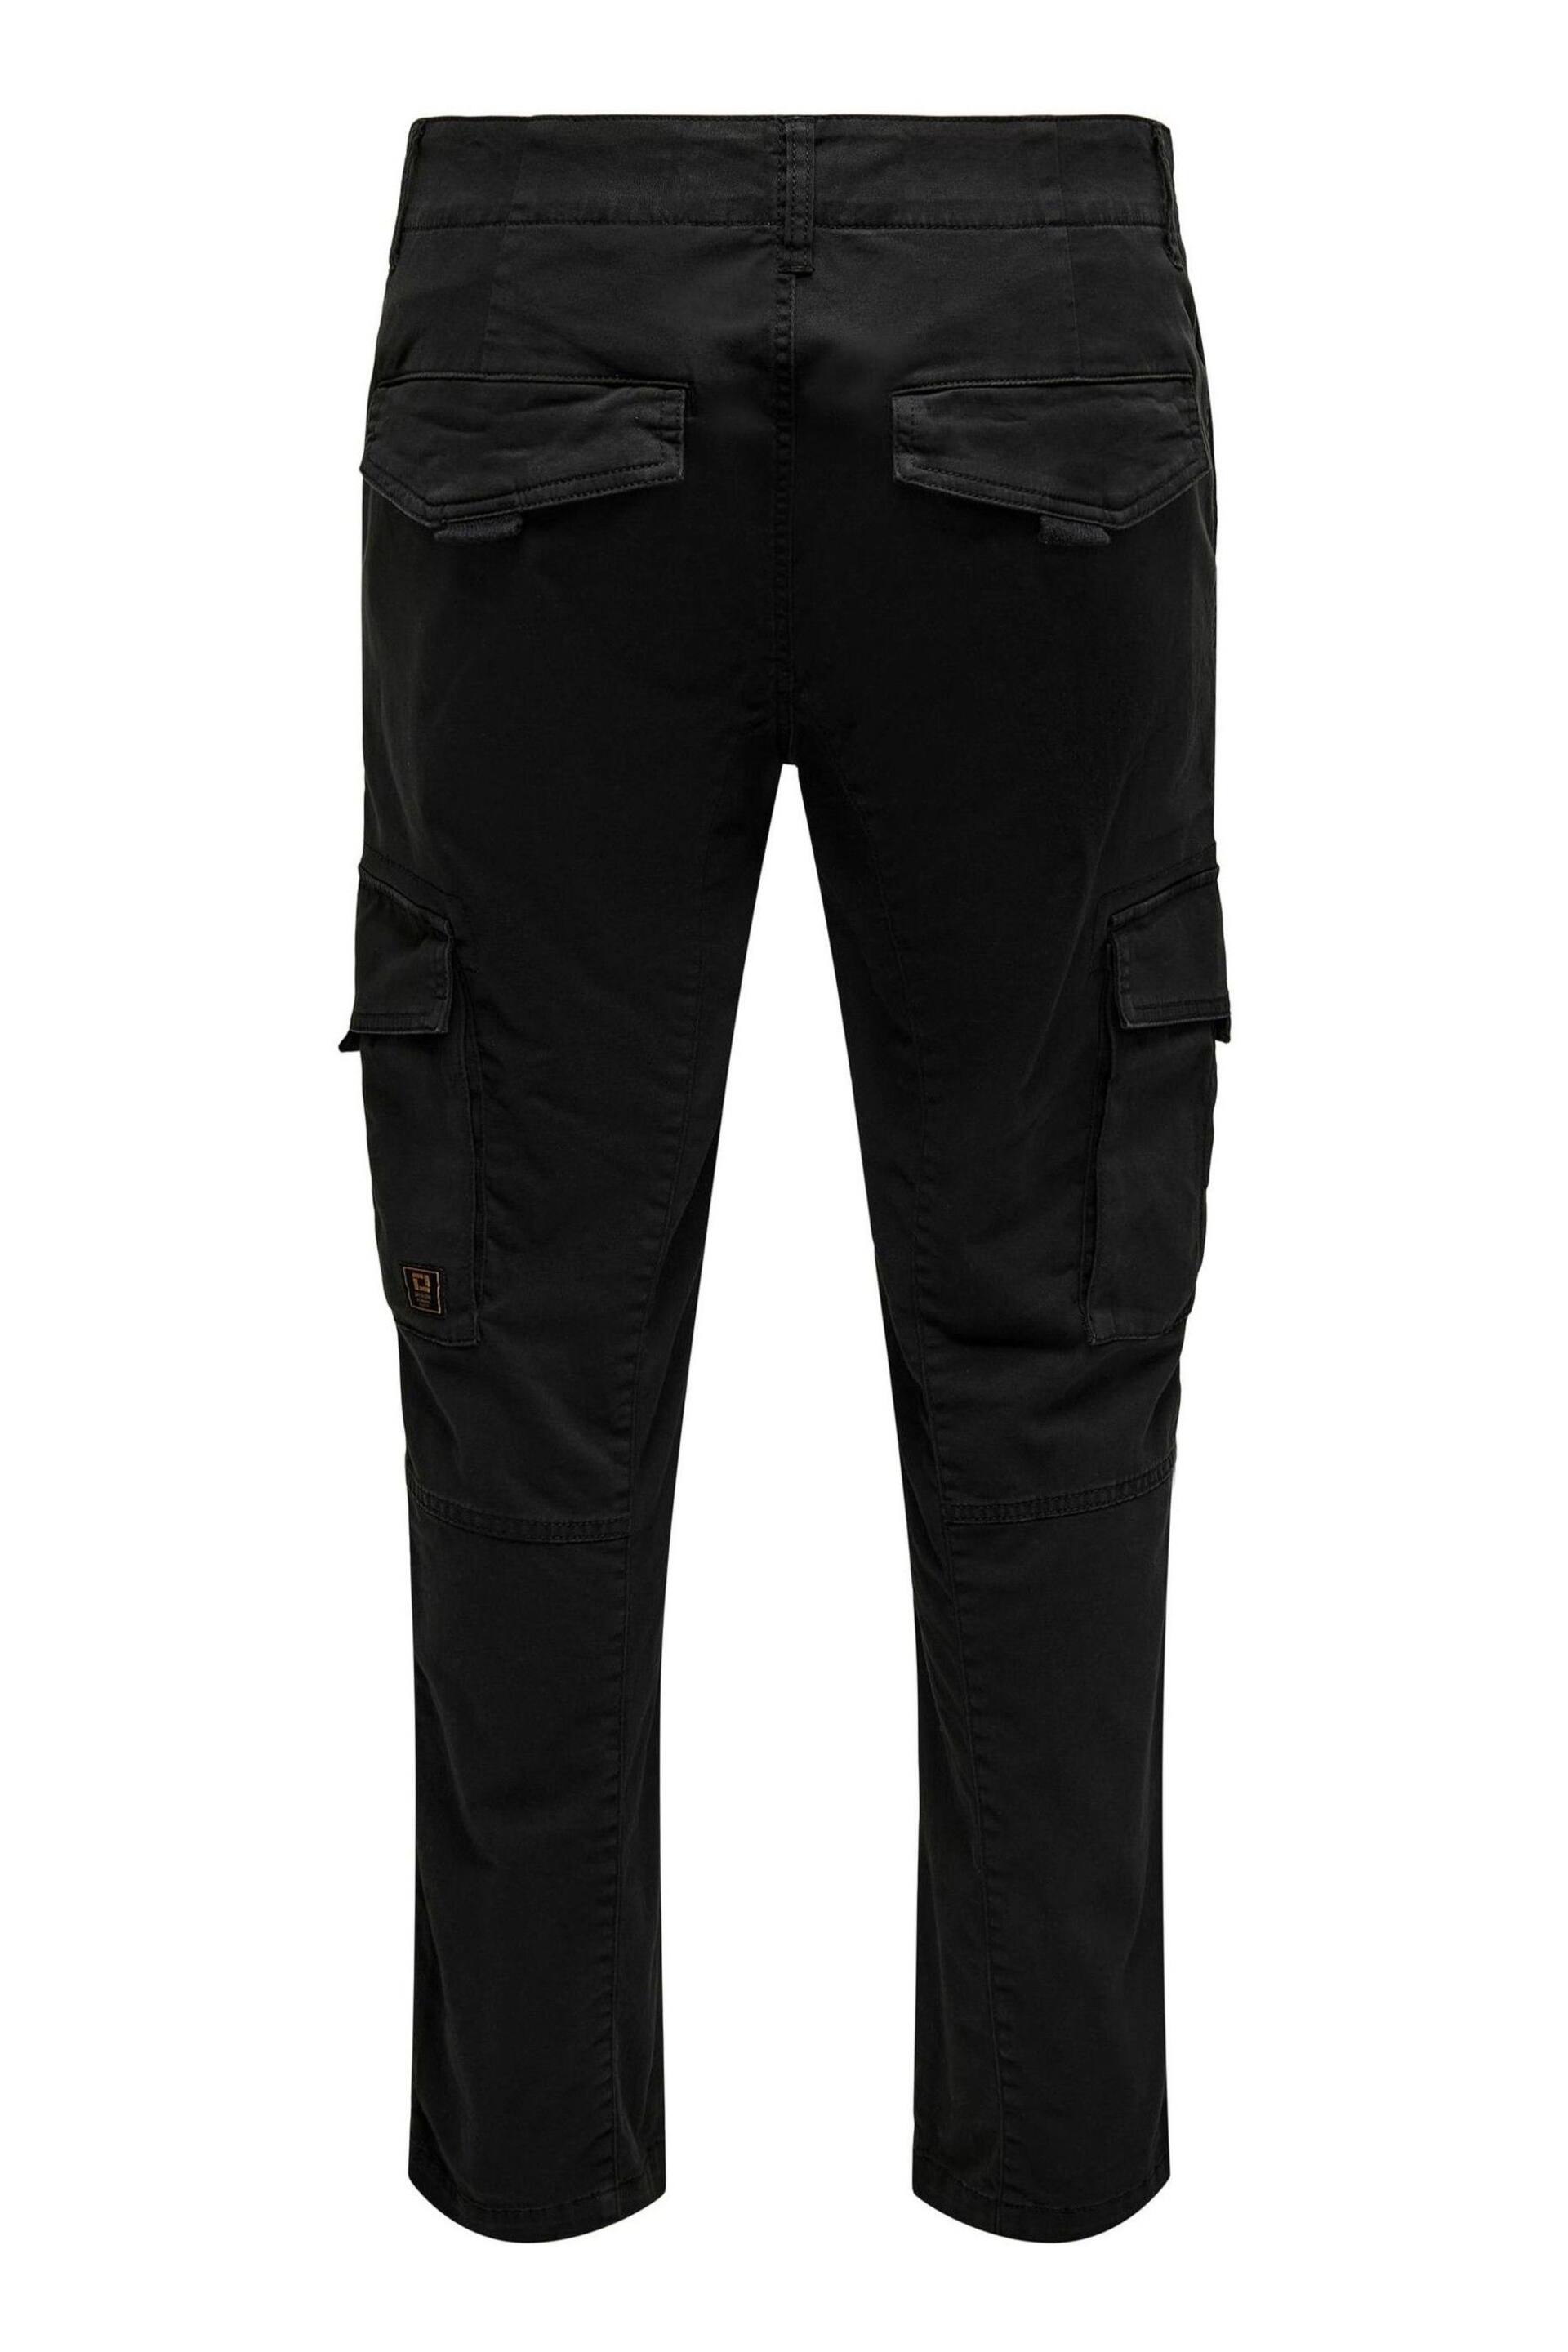 Only & Sons Black Straight Leg Cargo Trousers - Image 7 of 7